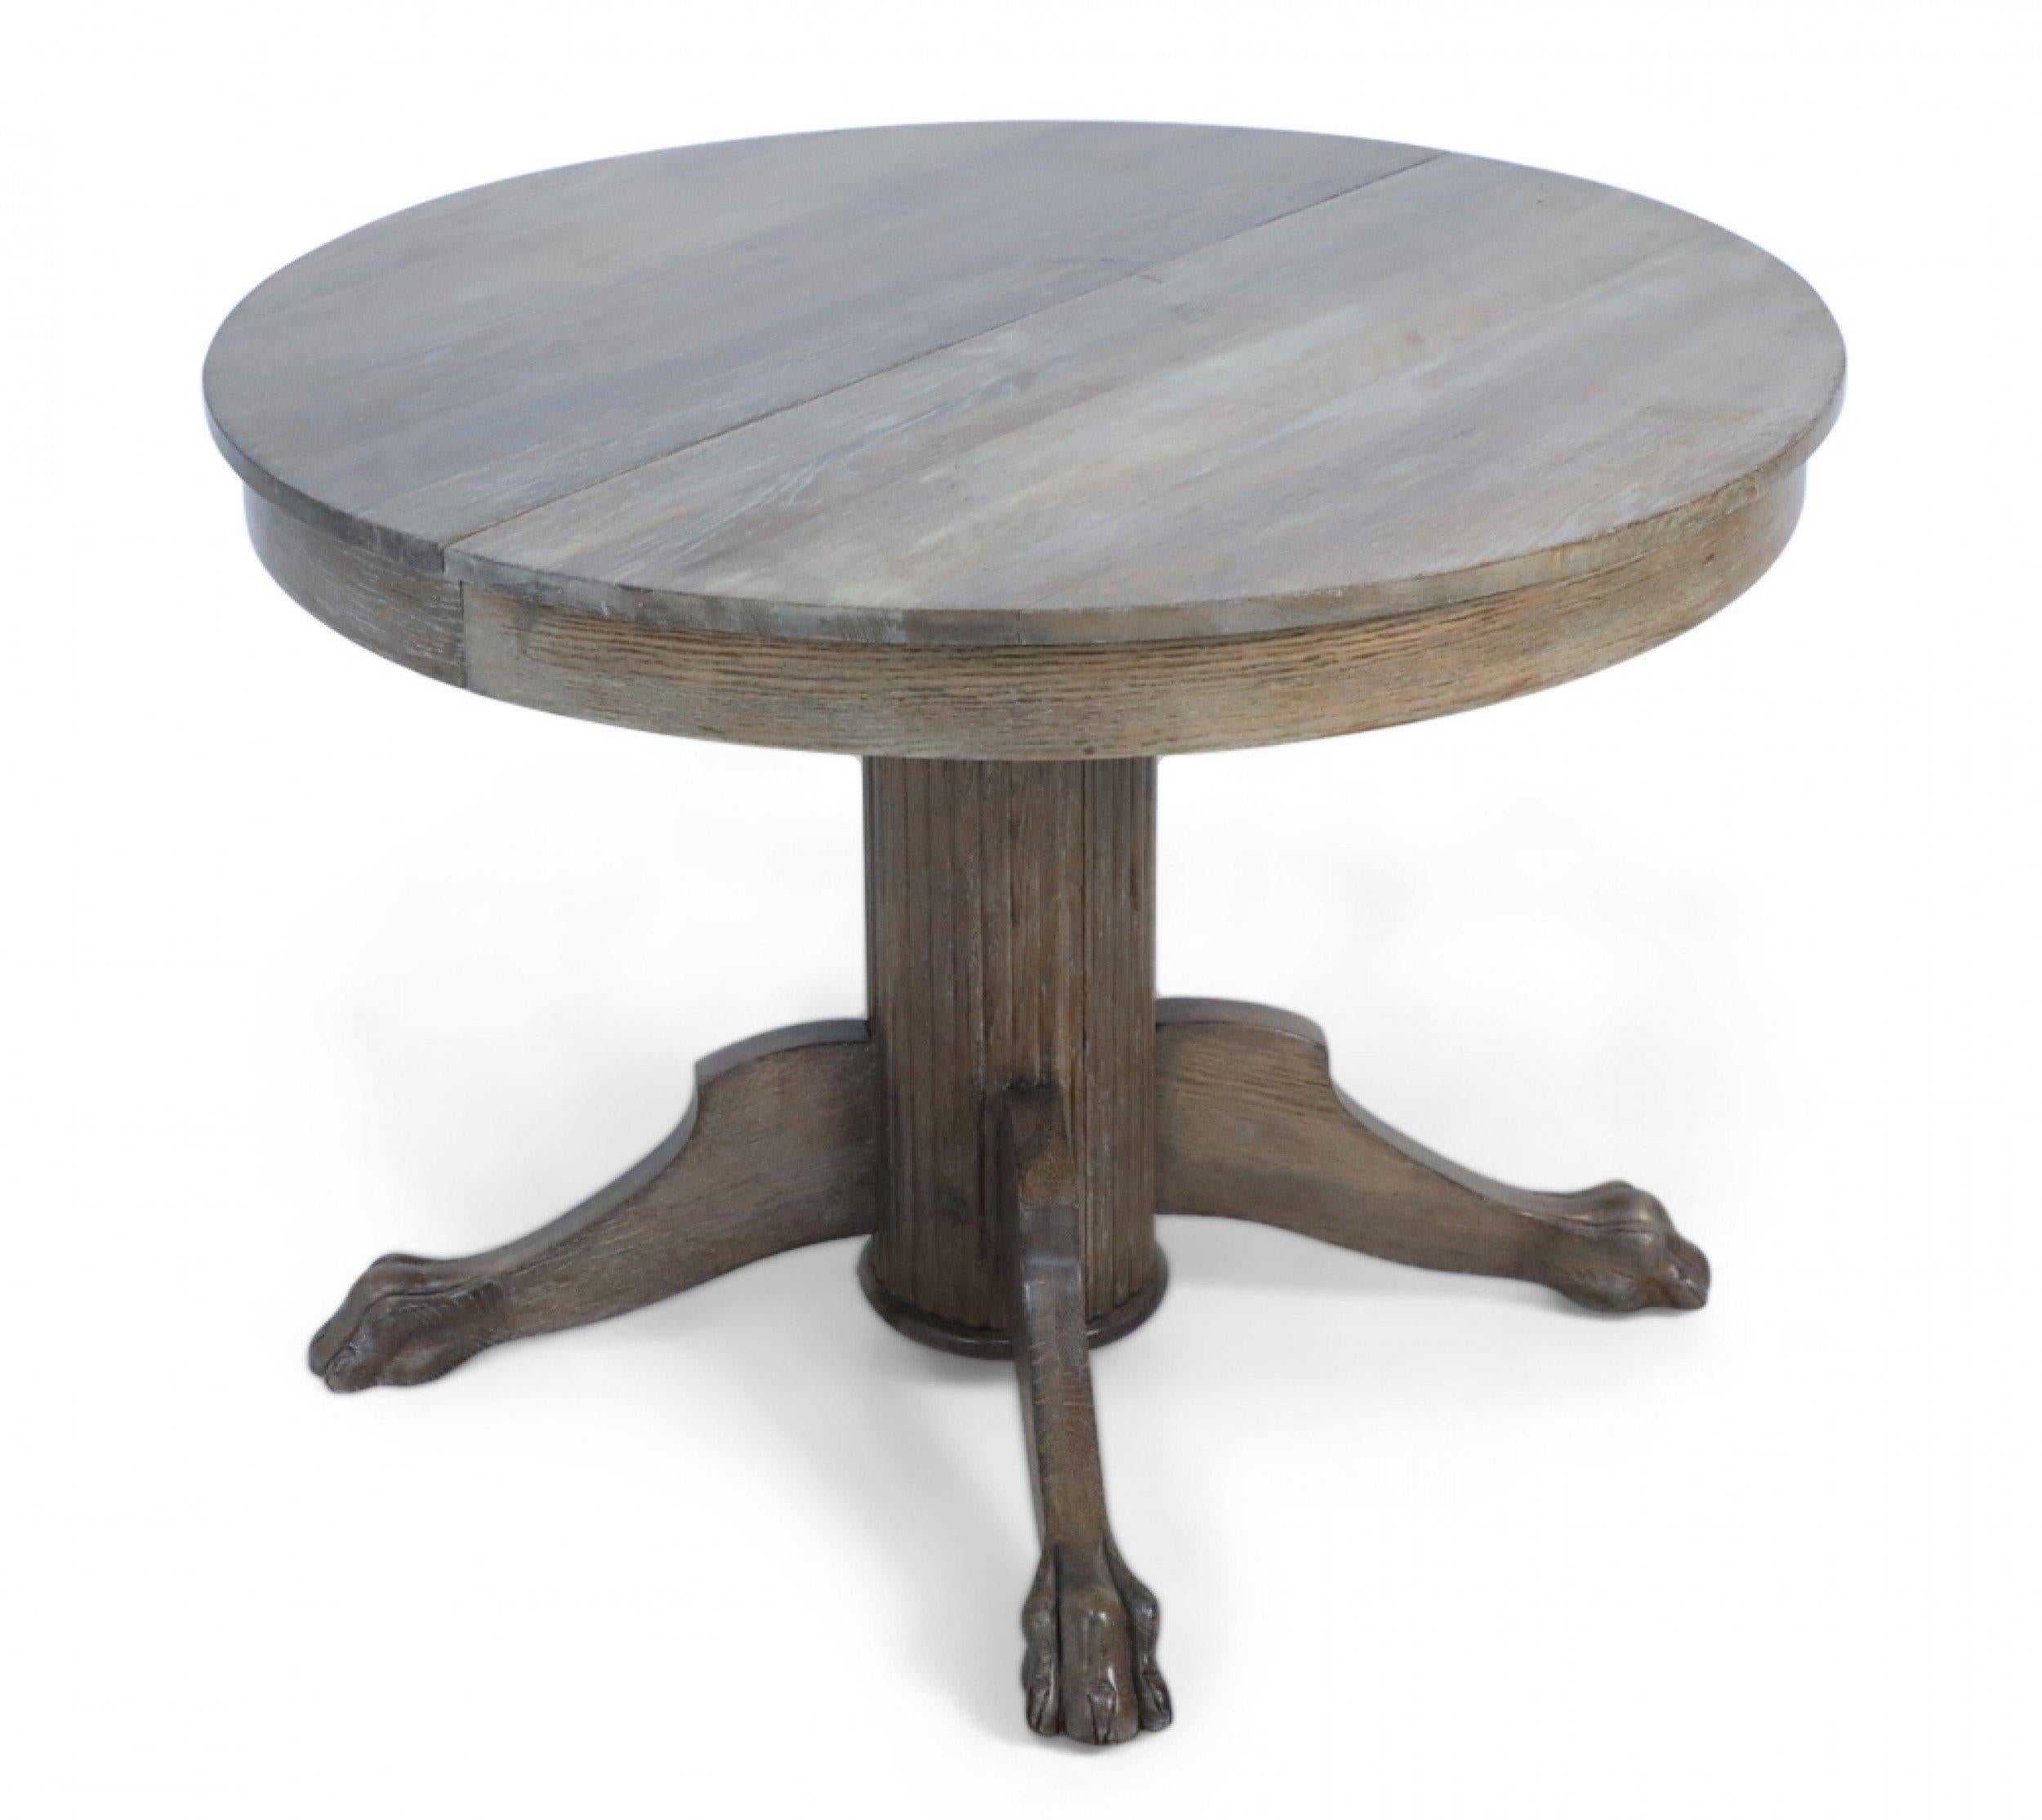 English Edwardian cerused oak dining / center table with a circular top resting on a fluted pedestal base with three claw feet. (two 23.5